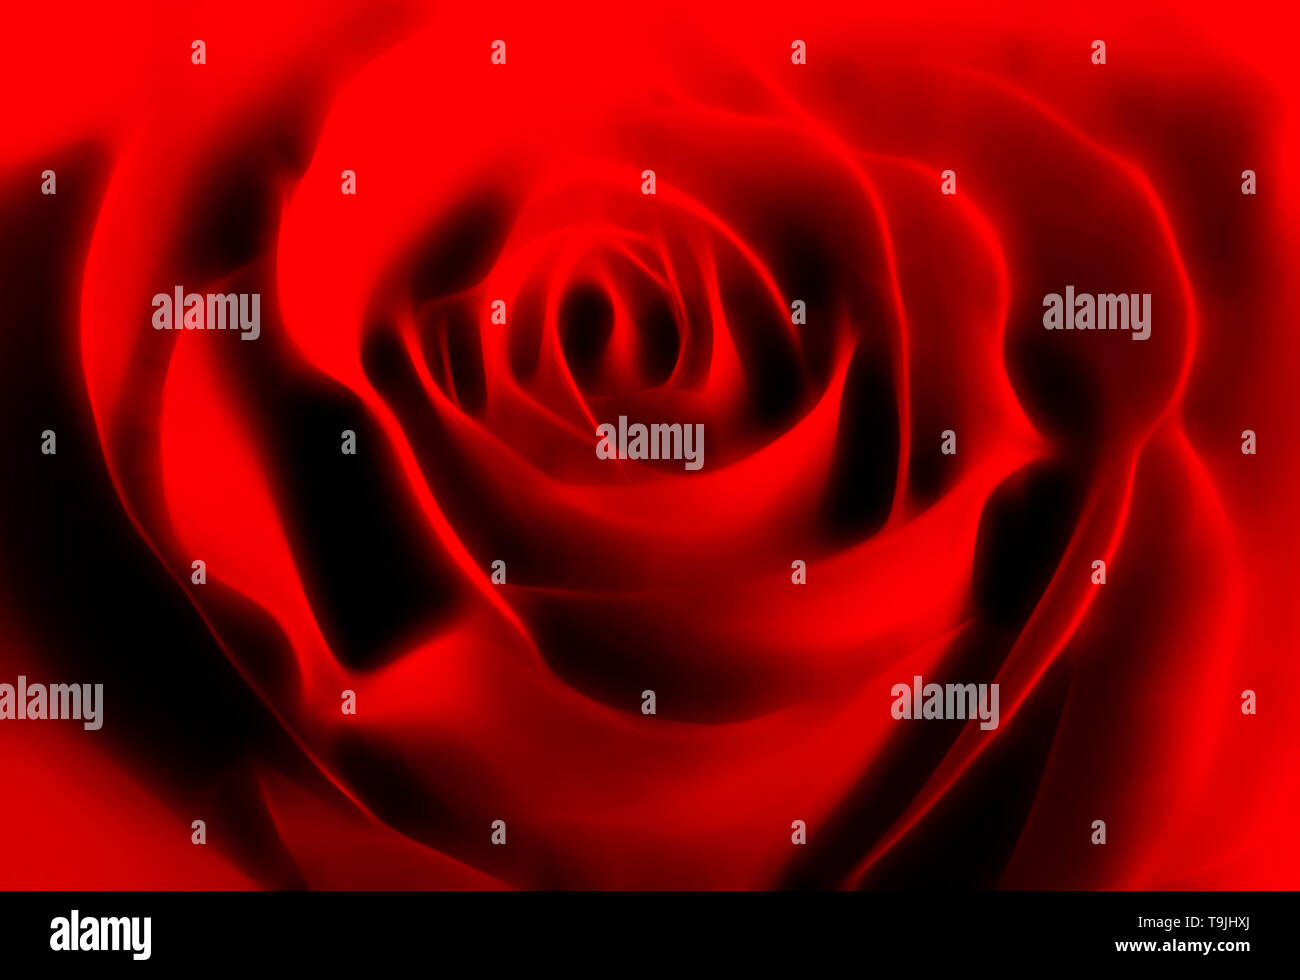 abstract red rose background Stock Photo